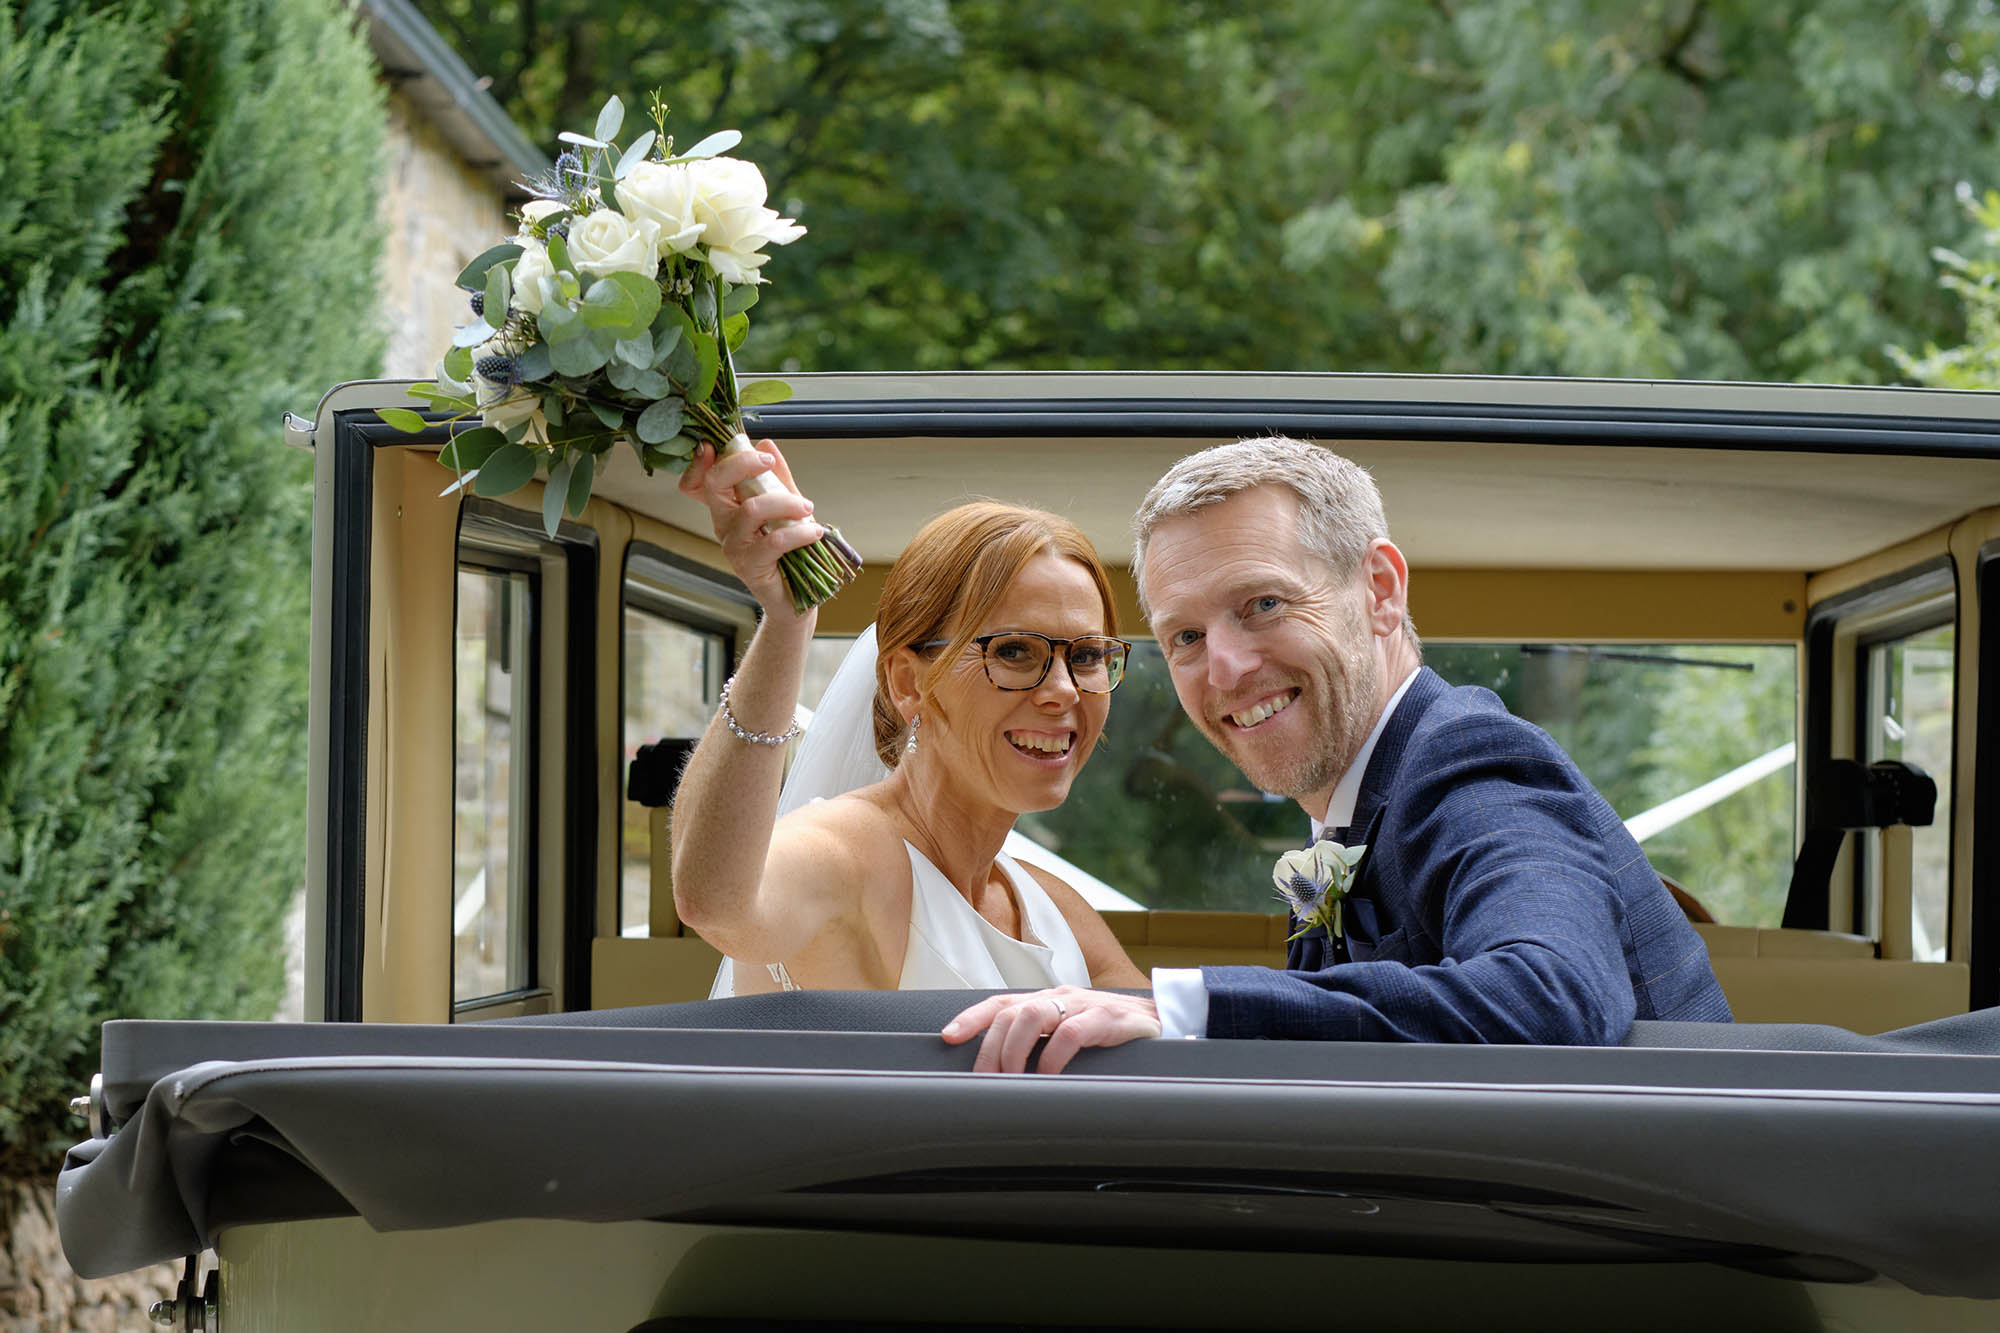 Bride and groom wave flowers and smile from the back of their vintage wedding car - Sheffield wedding photographer John Mottershaw